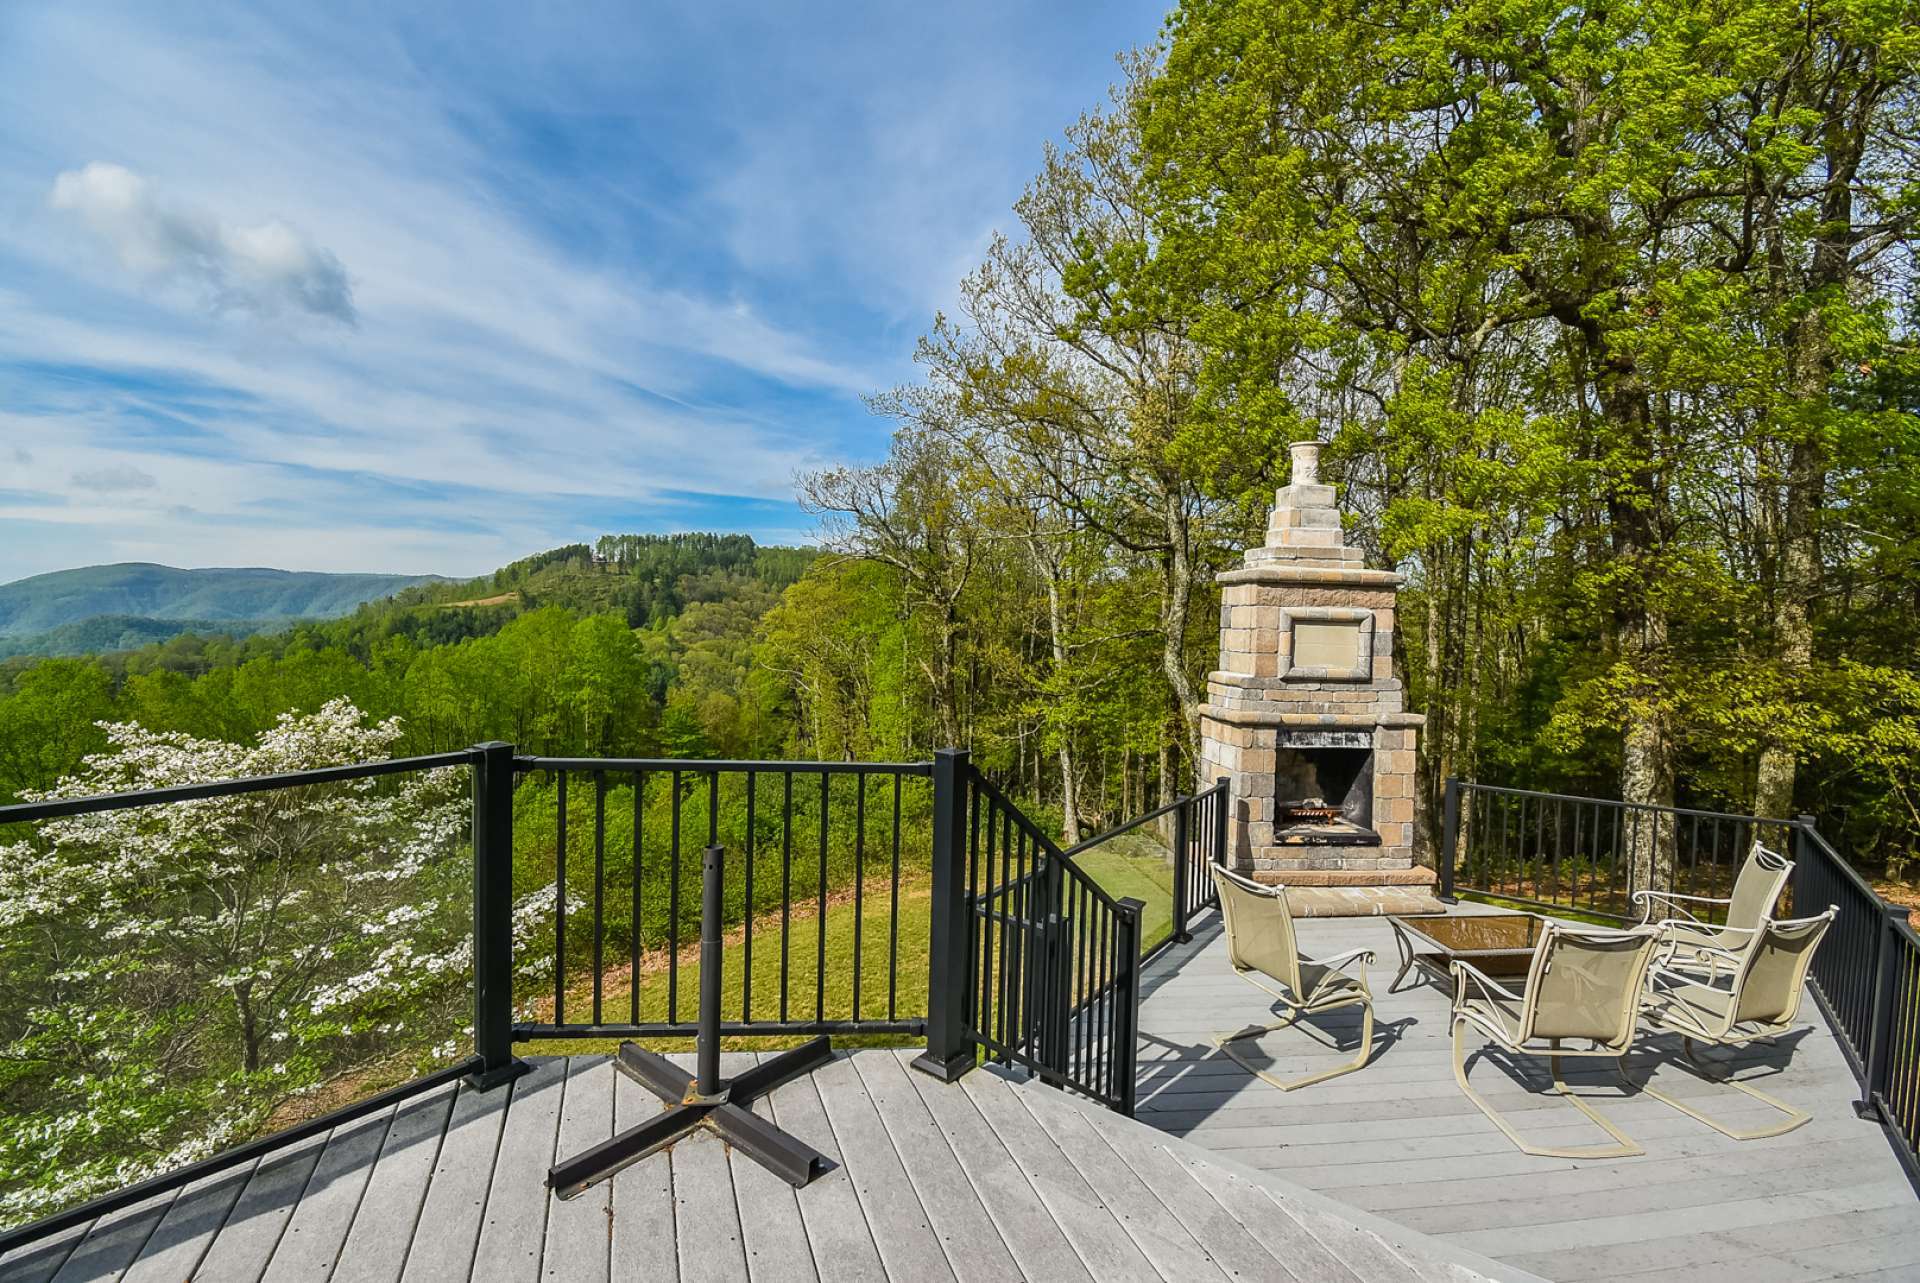 This home is designed for entertaining. This expansive open deck offers wrought iron accents, composite decking, a stone wood-burning fireplace for anytime ambiance and cool evening warmth, and sweeping long range layered views.